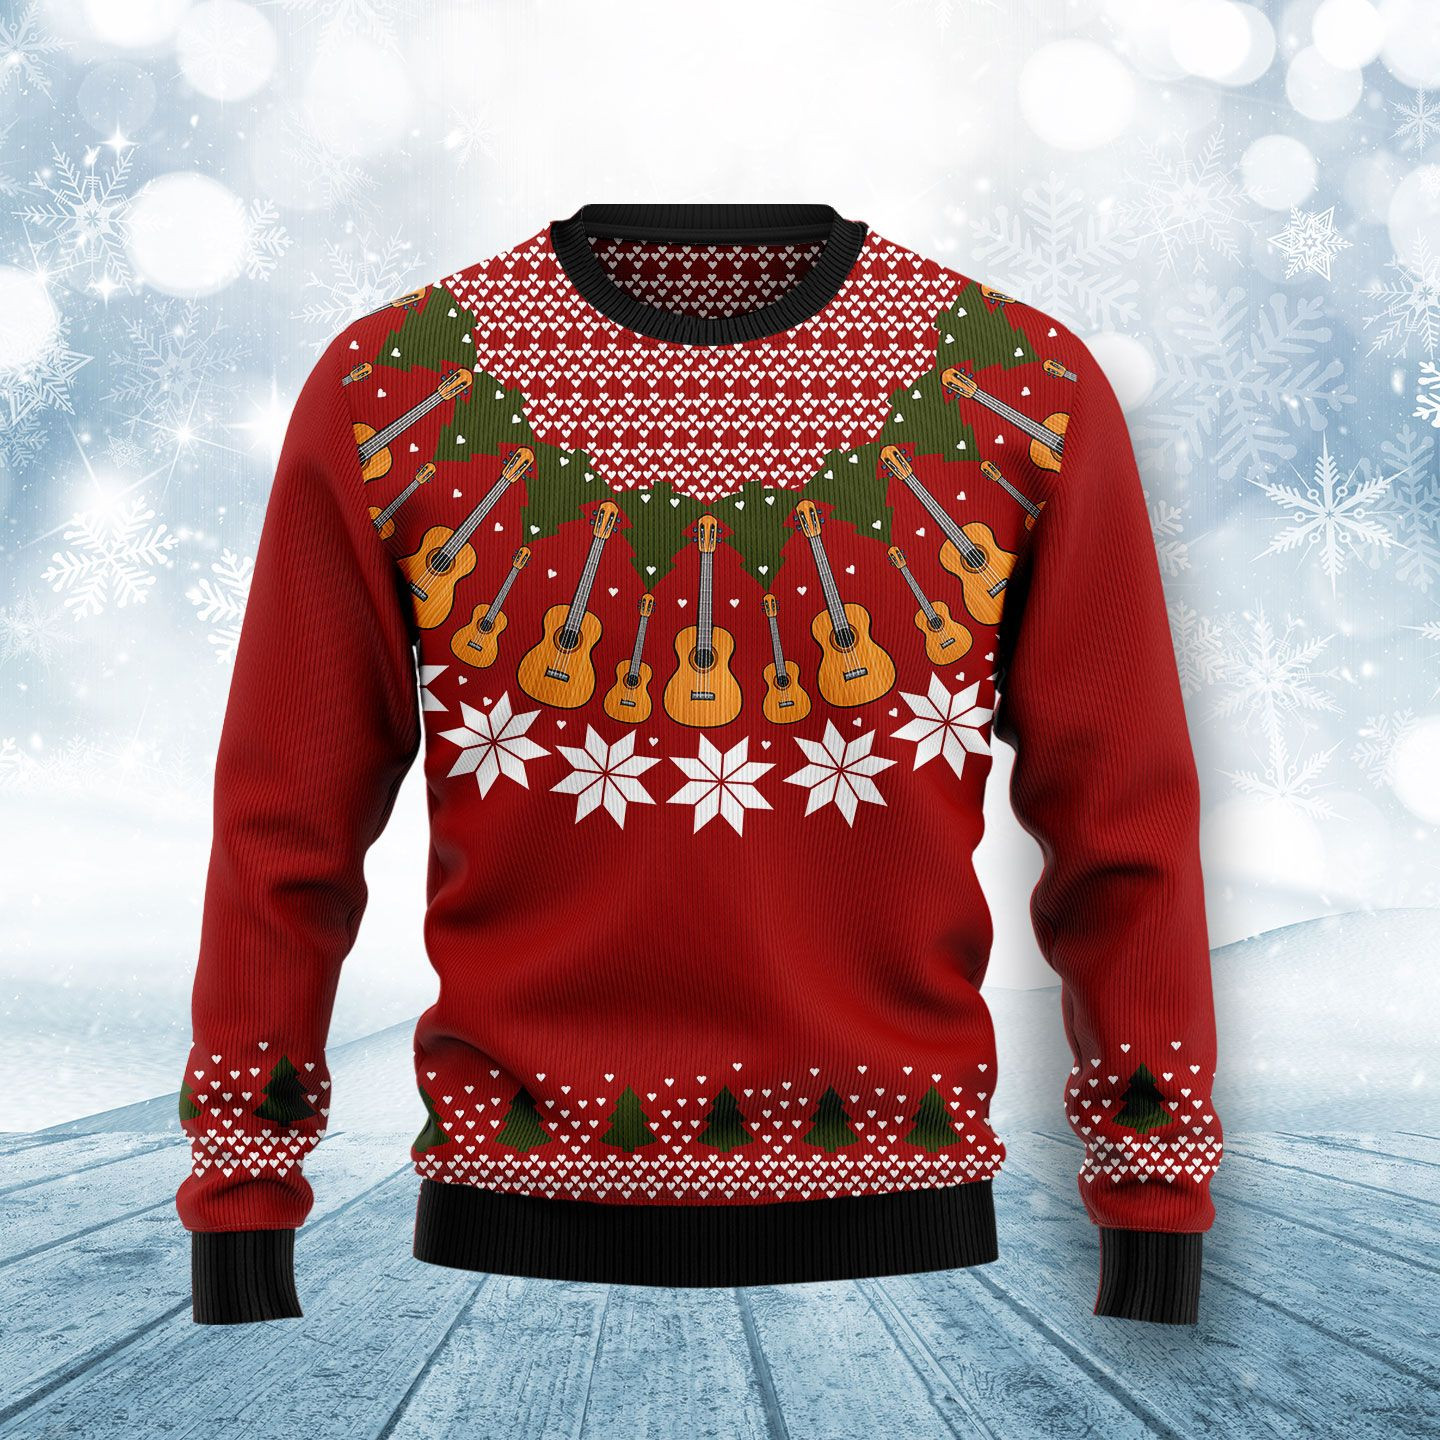 Guitar Lover Ugly Christmas Sweater